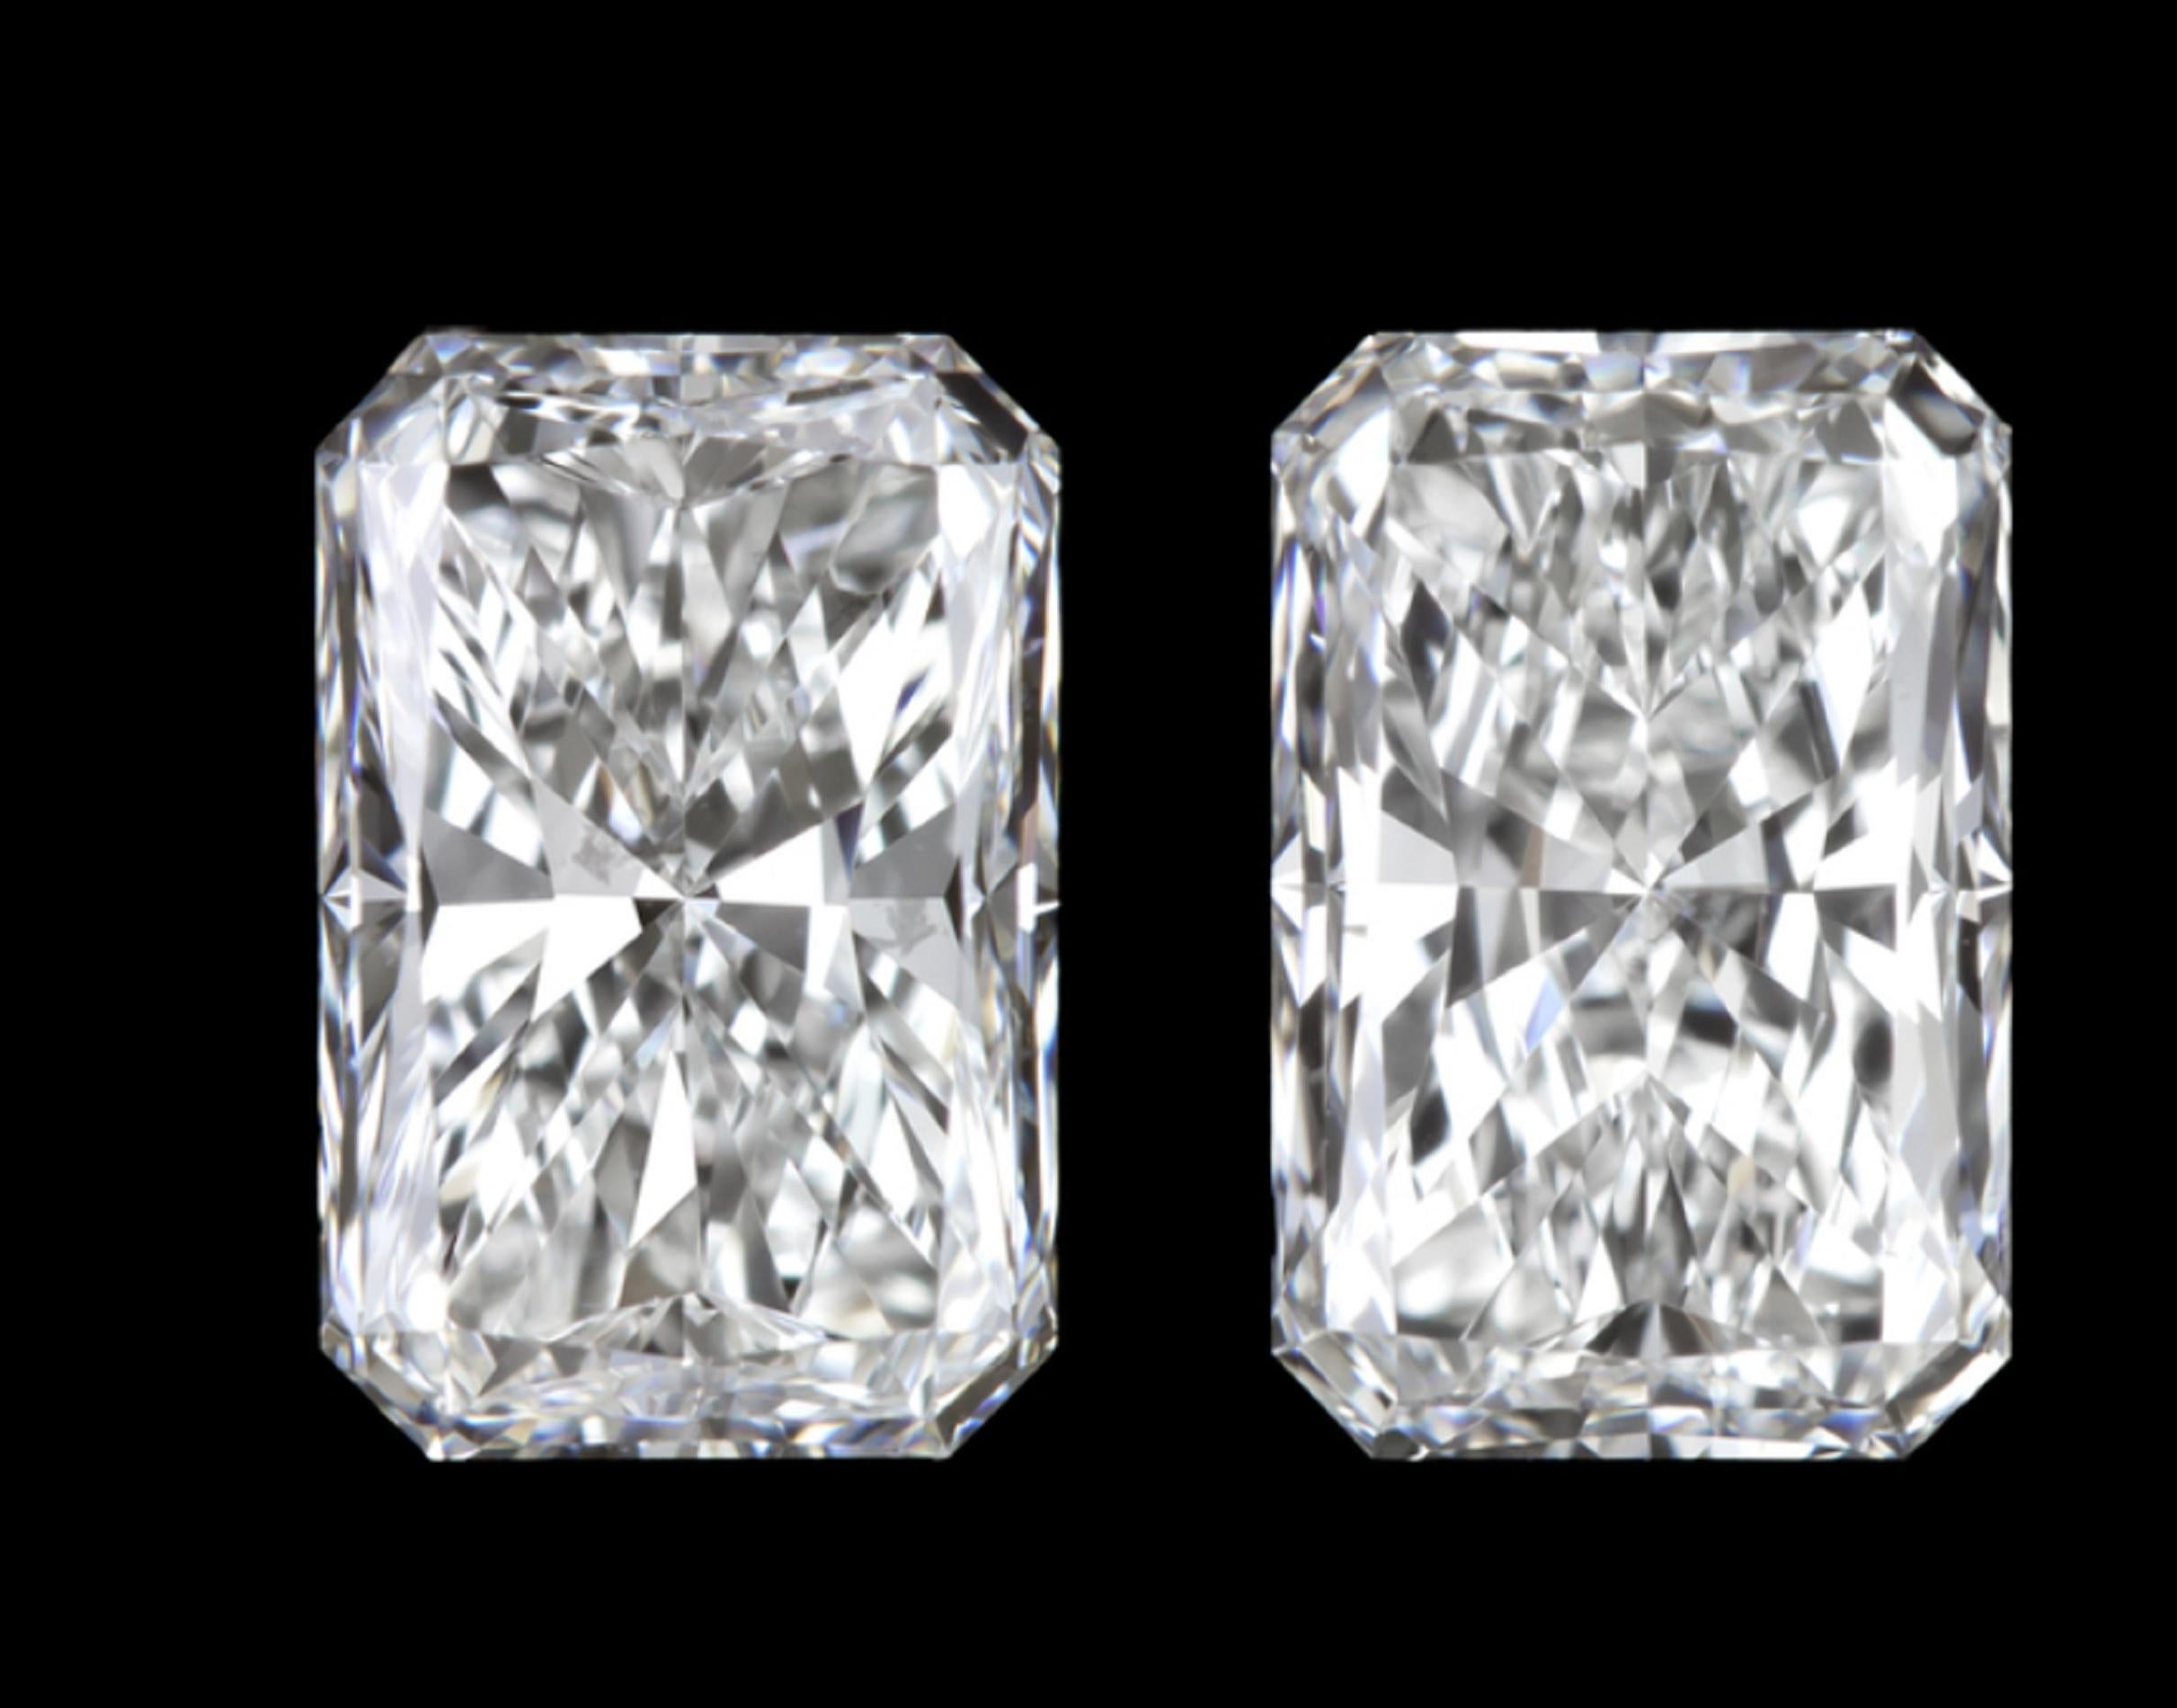 Exquisite 3 carat pair of radiant cut GIA certified diamonds is beautifully white and colorless, eye clean, and dazzlingly brilliant! These have a rare elongated cut and display eye-catching sparkle! These radiant diamonds are each certified by GIA,